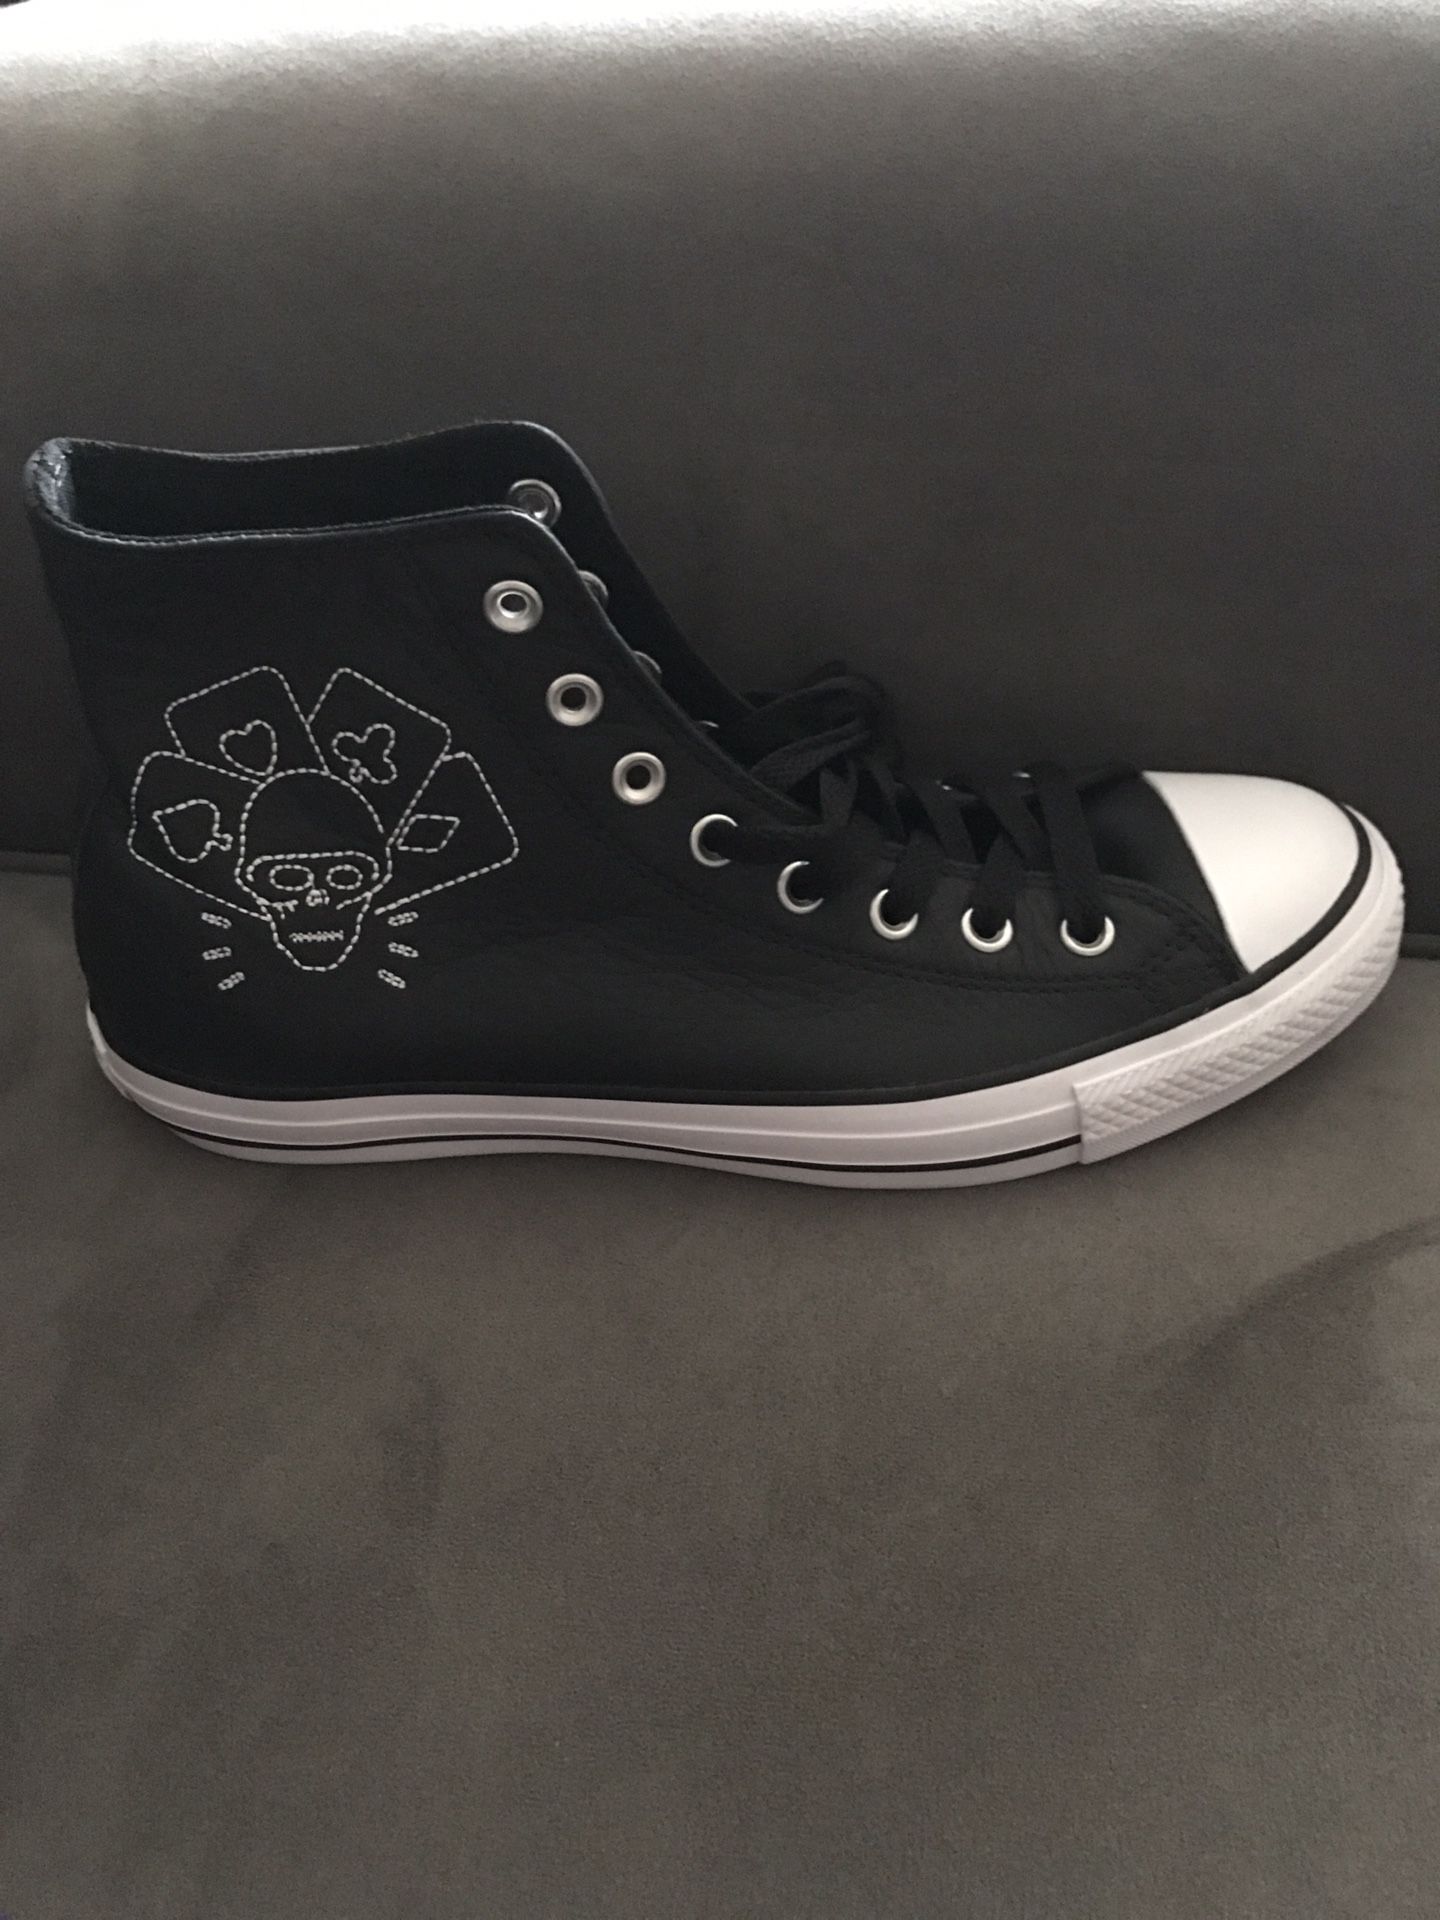 Converse Star Men's 9. Limited "The Clash" Sale in Lowell, MA - OfferUp